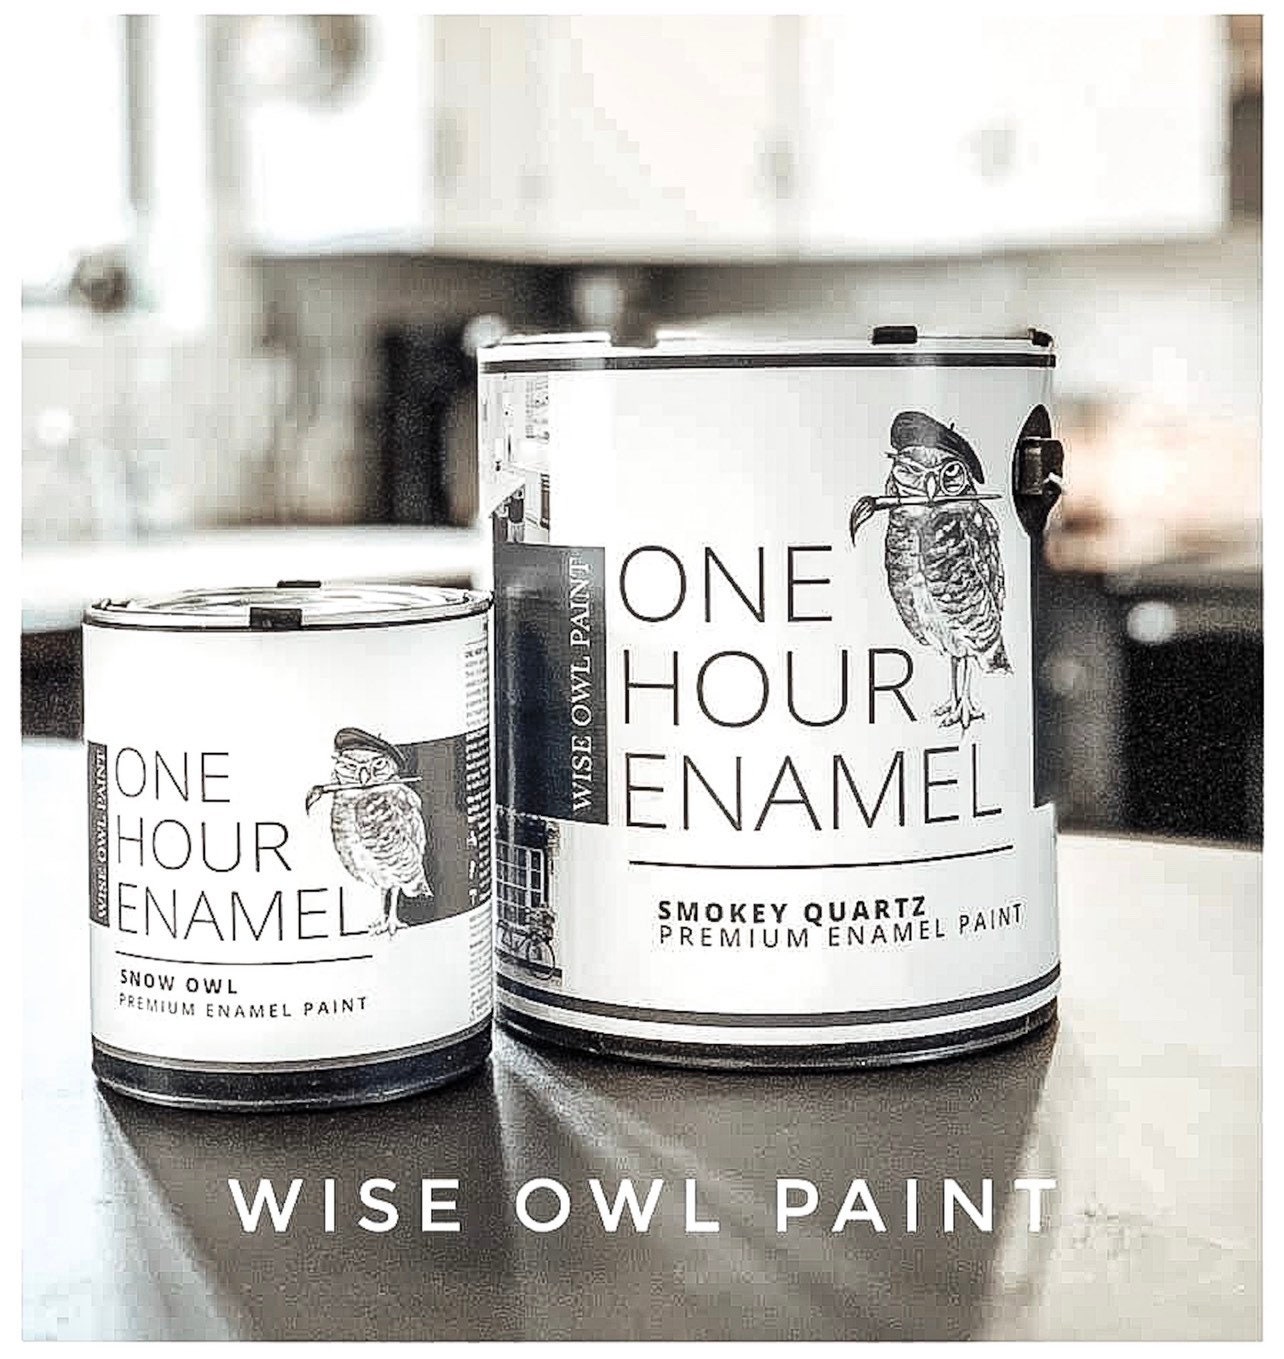 Wise Owl Paint on Instagram: Before and after by  @upcycledfurniturebyorianna 🖤 Hand painted with One Hour Enamel in Jet  Black and the finish is this perfect satin sheen.